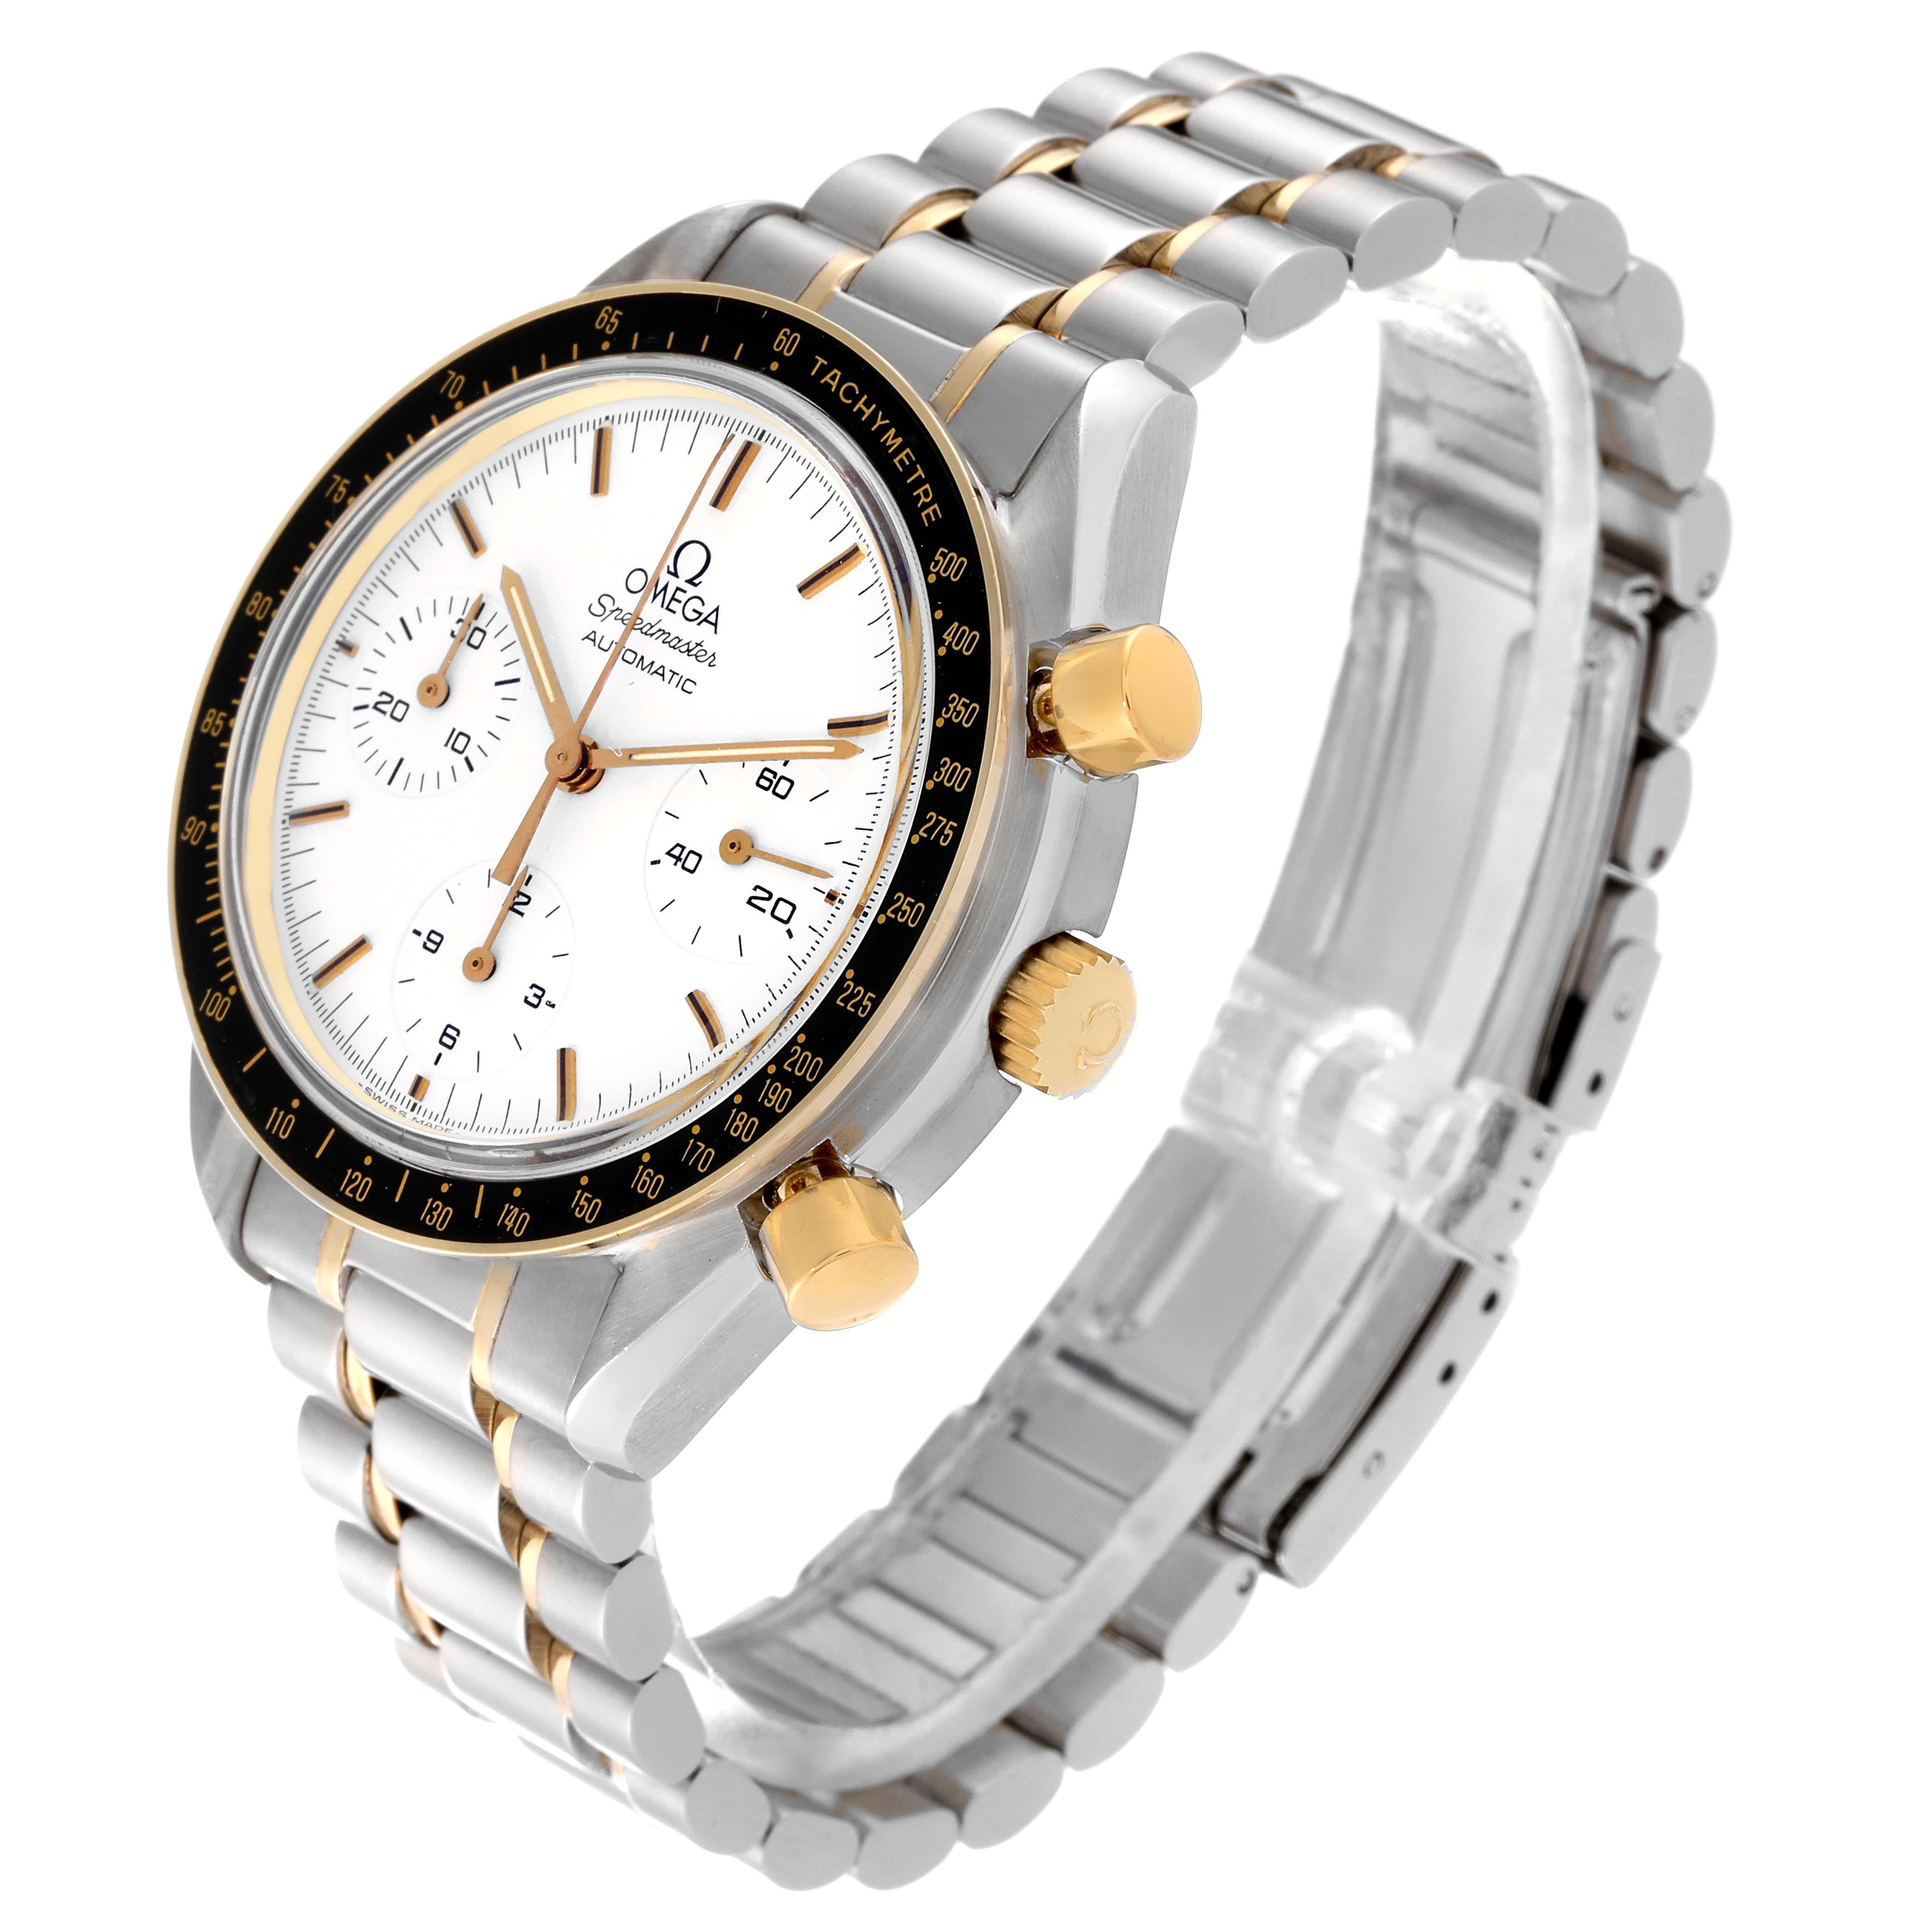 Omega Speedmaster Steel Yellow Gold Chronograph Mens Watch 3310.20.00 Papers en vente 2